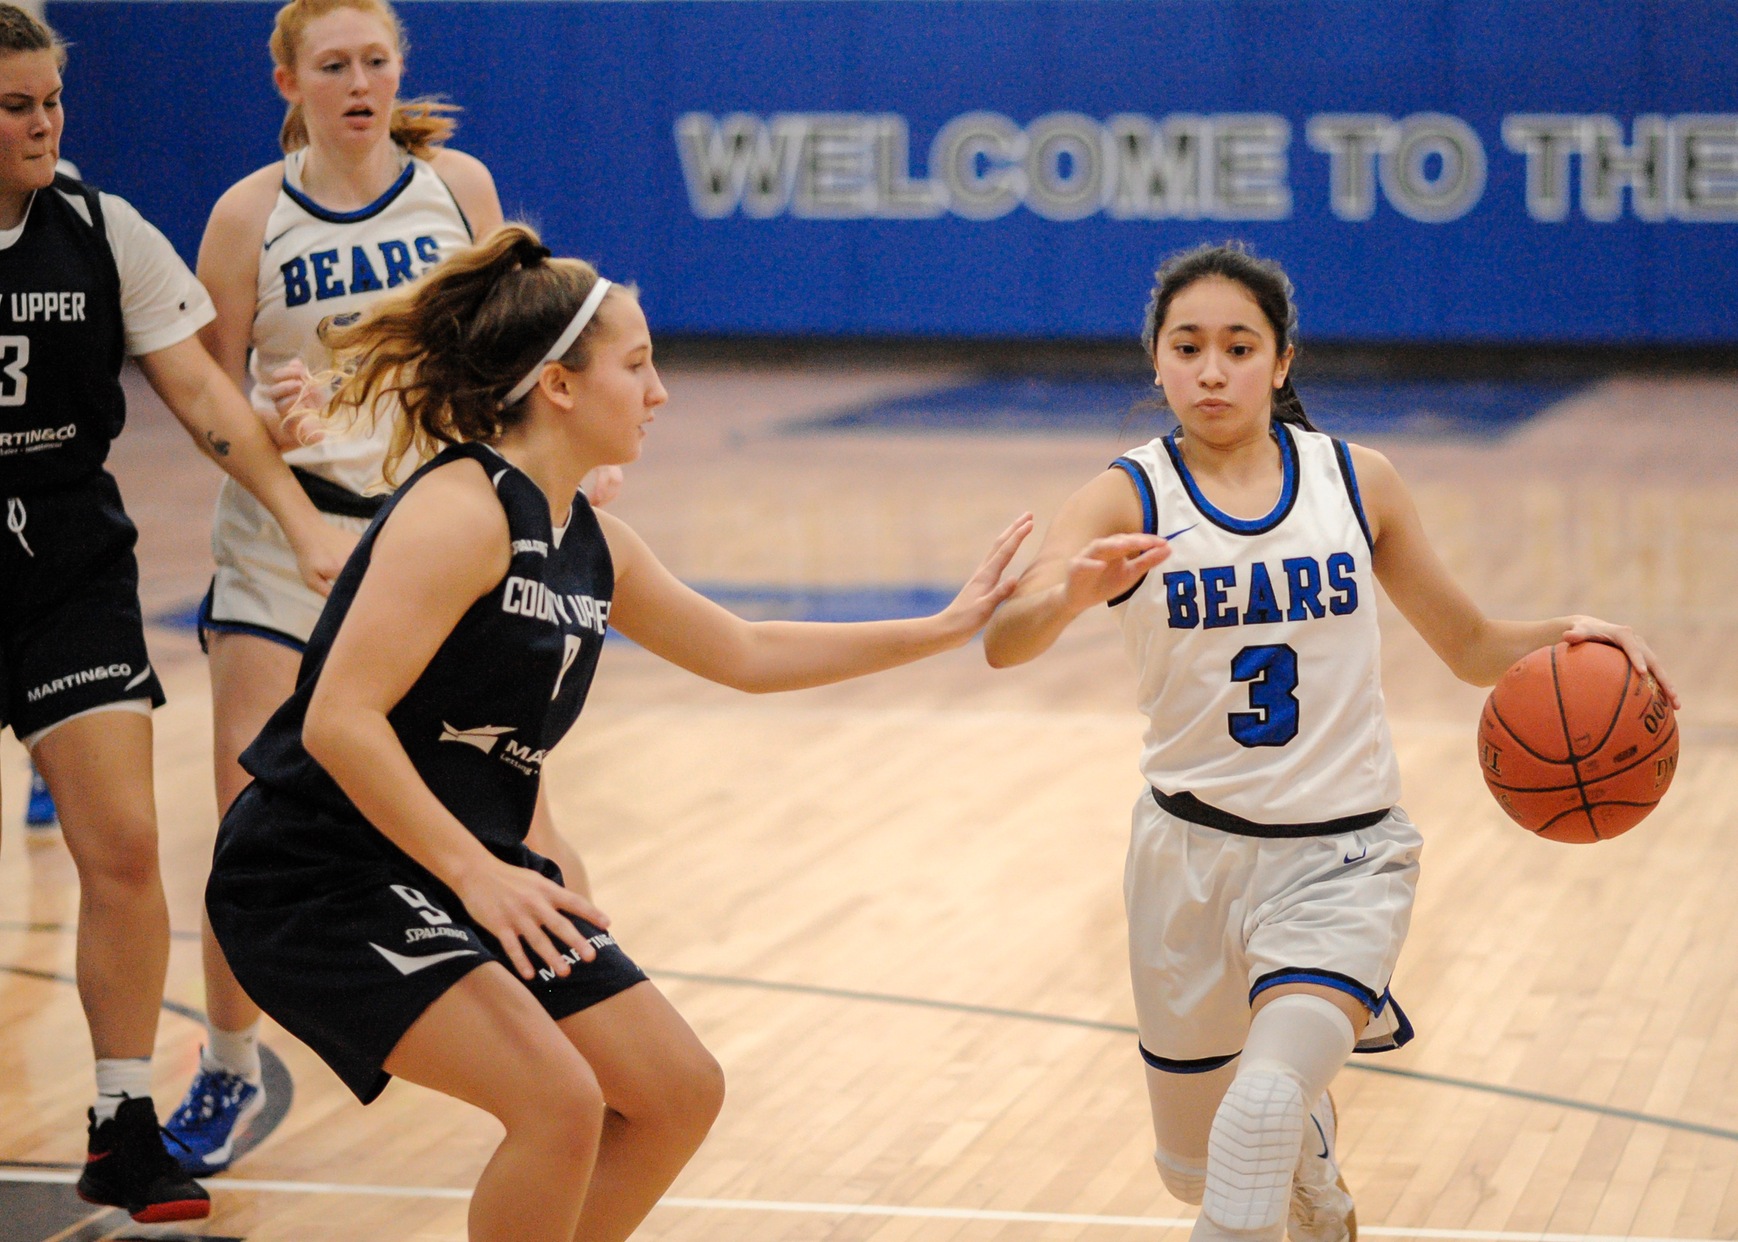 DMACC women's basketball team improves to 4-5 with 84-33 win